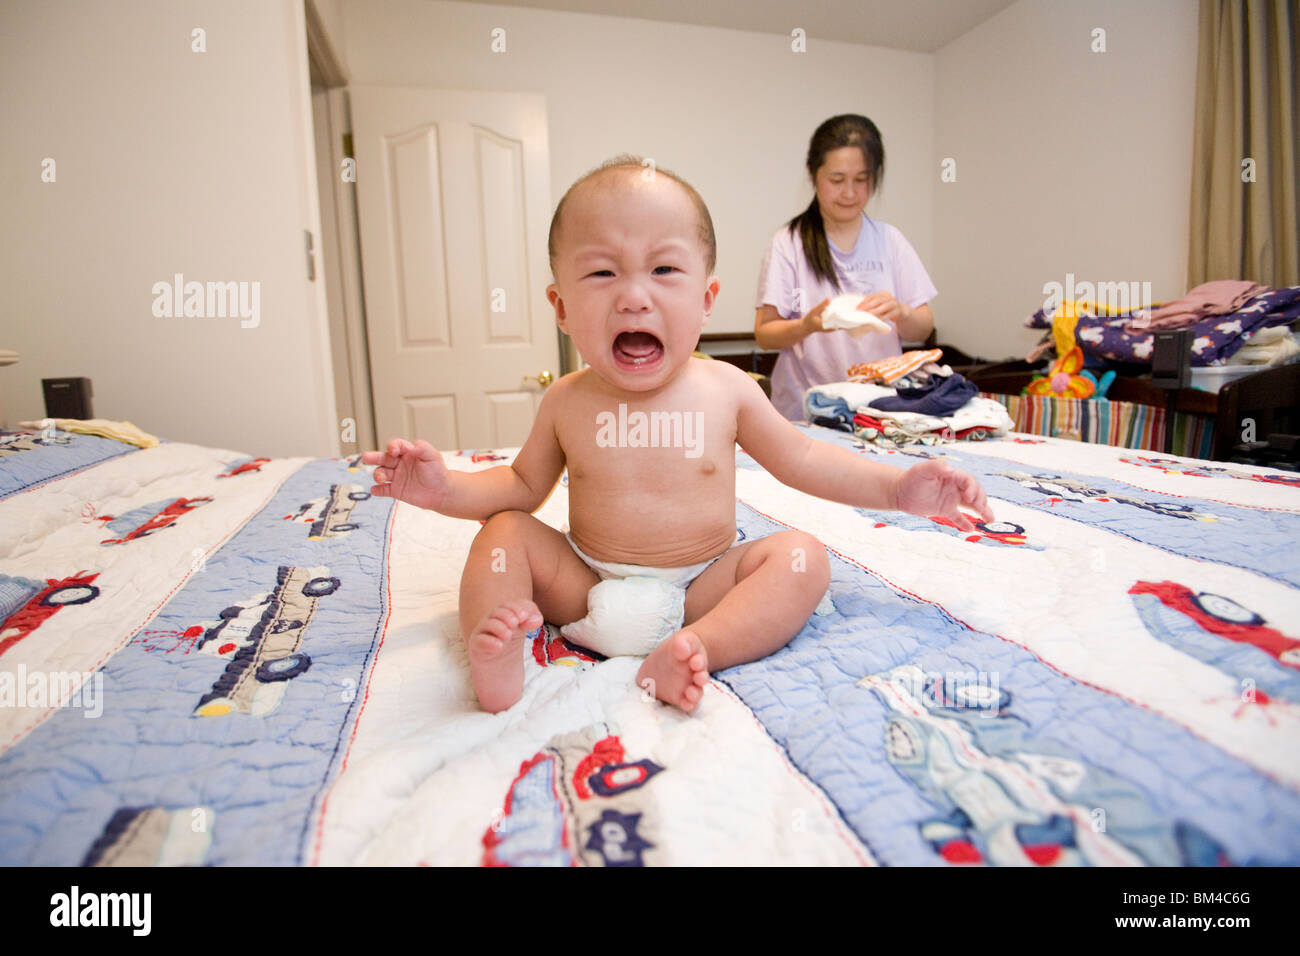 Crying Asian baby boy on bed Stock Photo